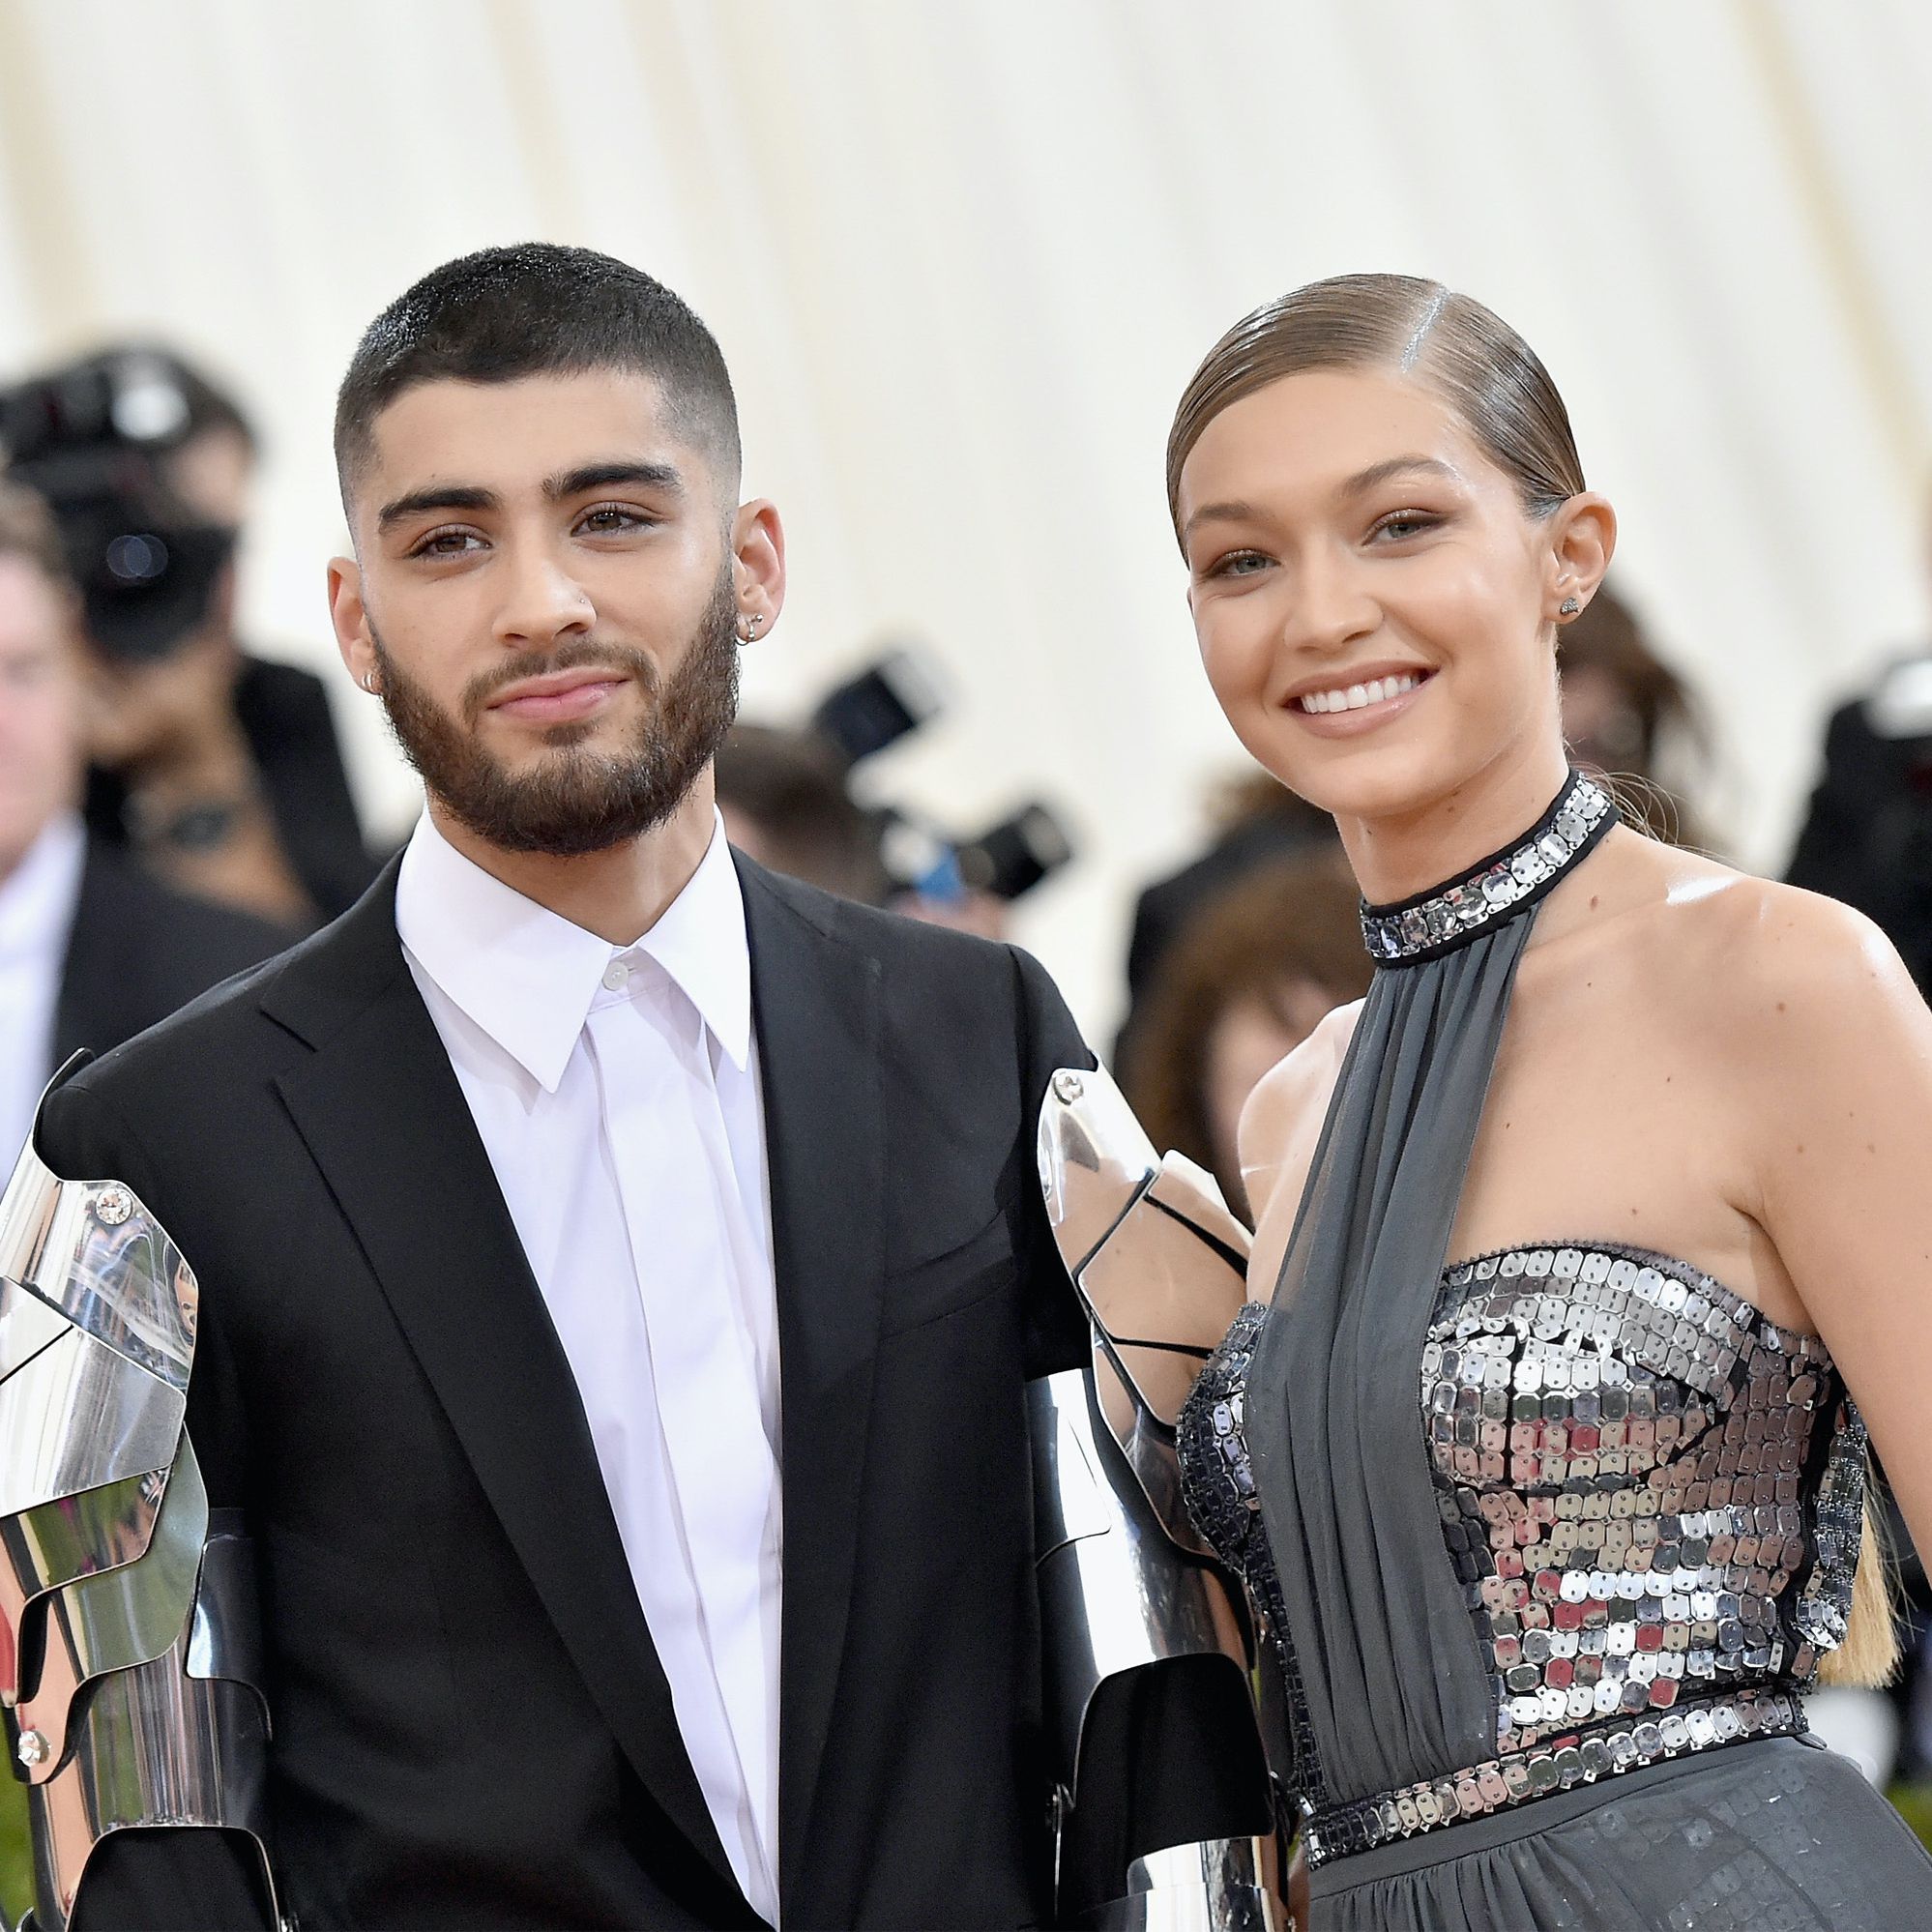 Gigi Hadid says Zayn Malik Usually Takes Her Mother's Side in Family Conversations: 'He is Smart'